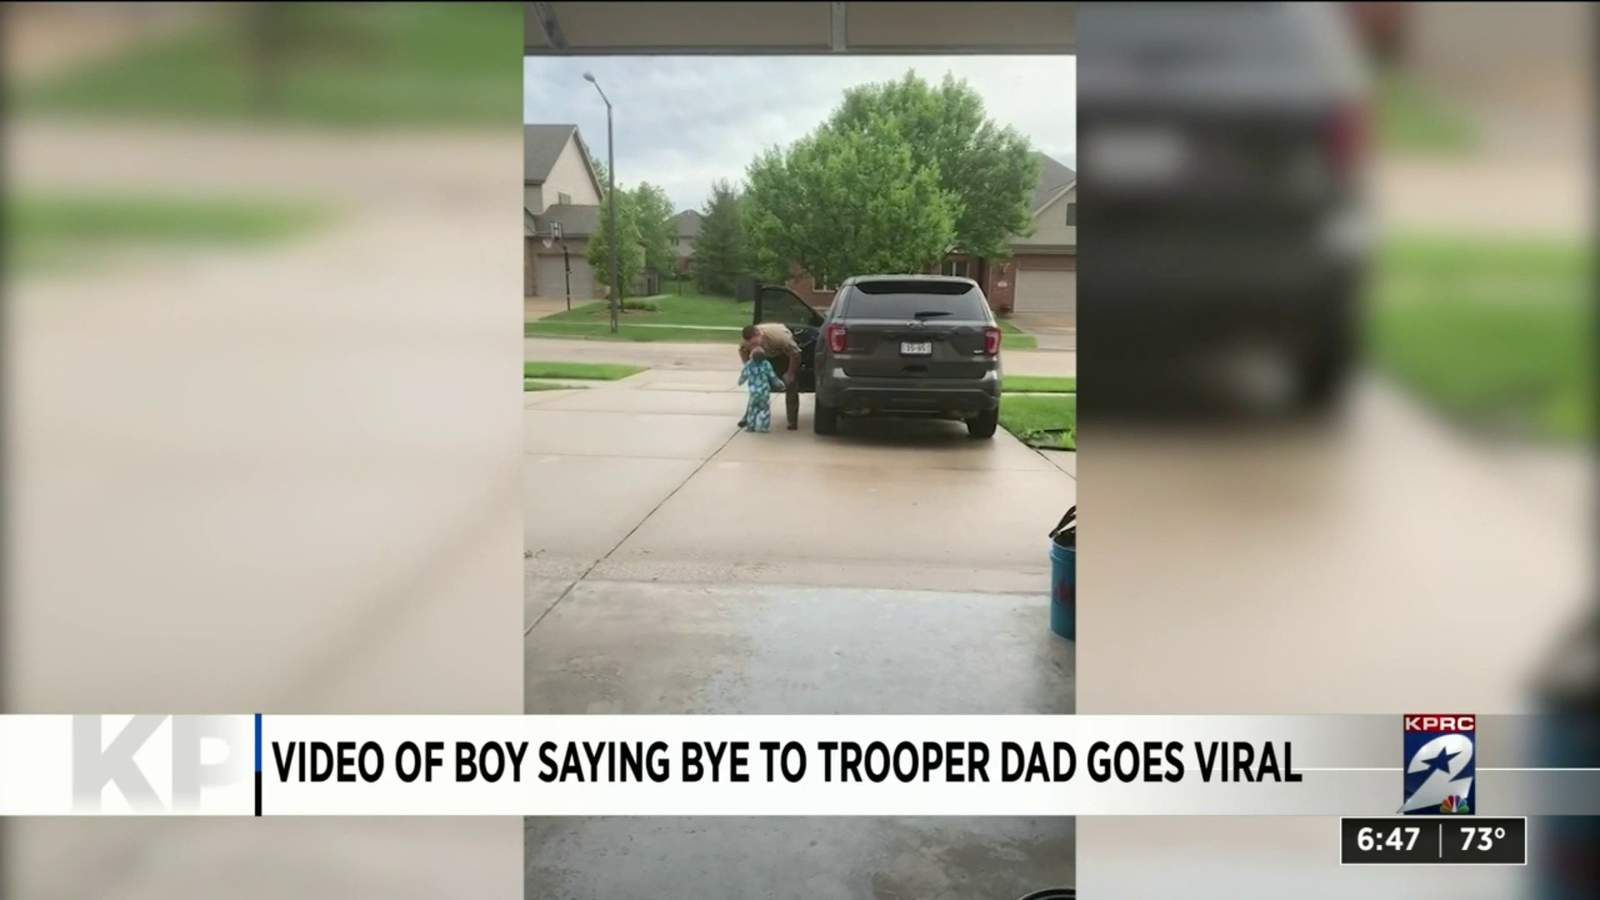 One Good Thing: Cute video of boy saying bye to trooper dad goes viral